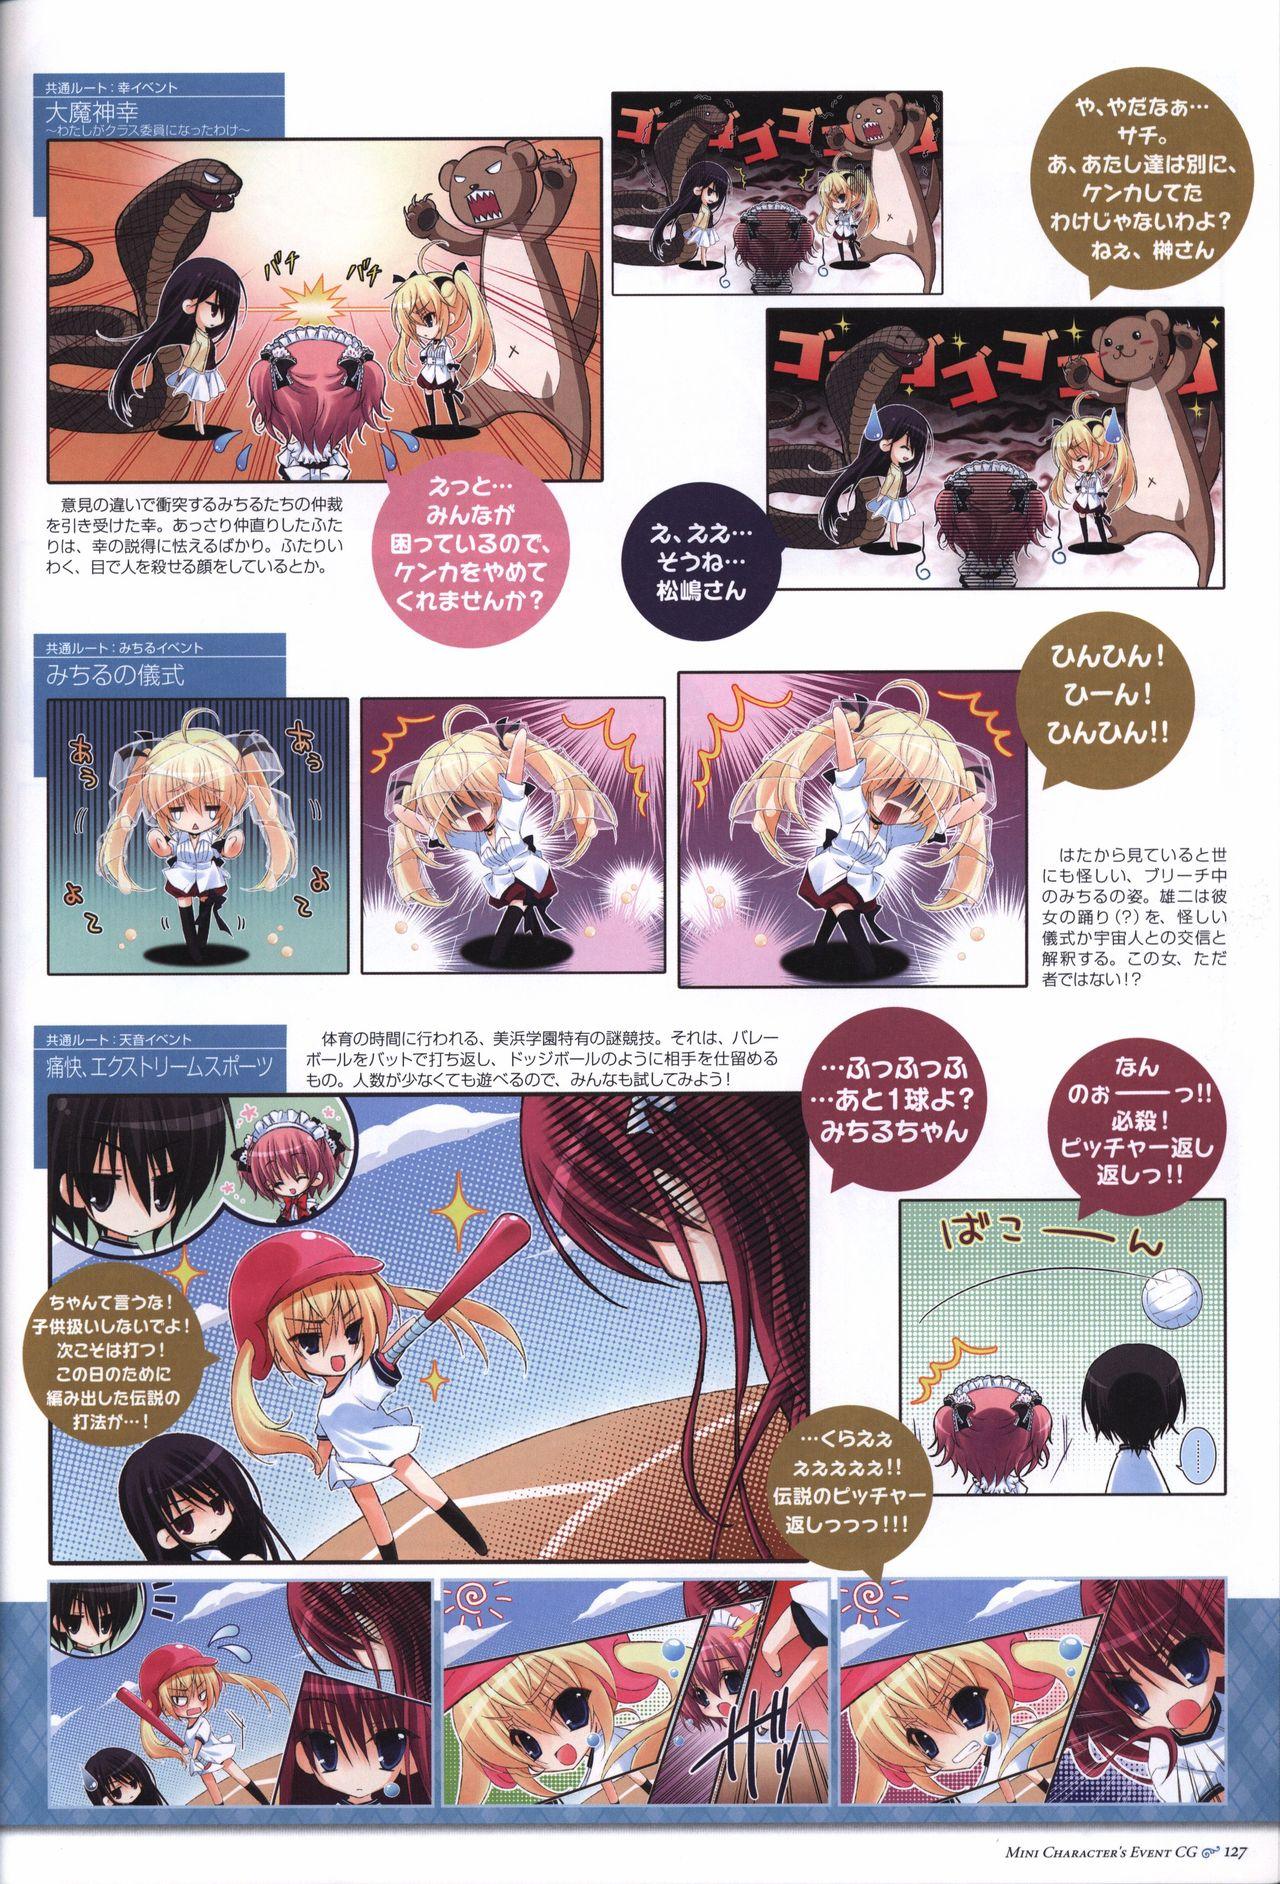 The Fruit of Grisaia Visual FanBook 127